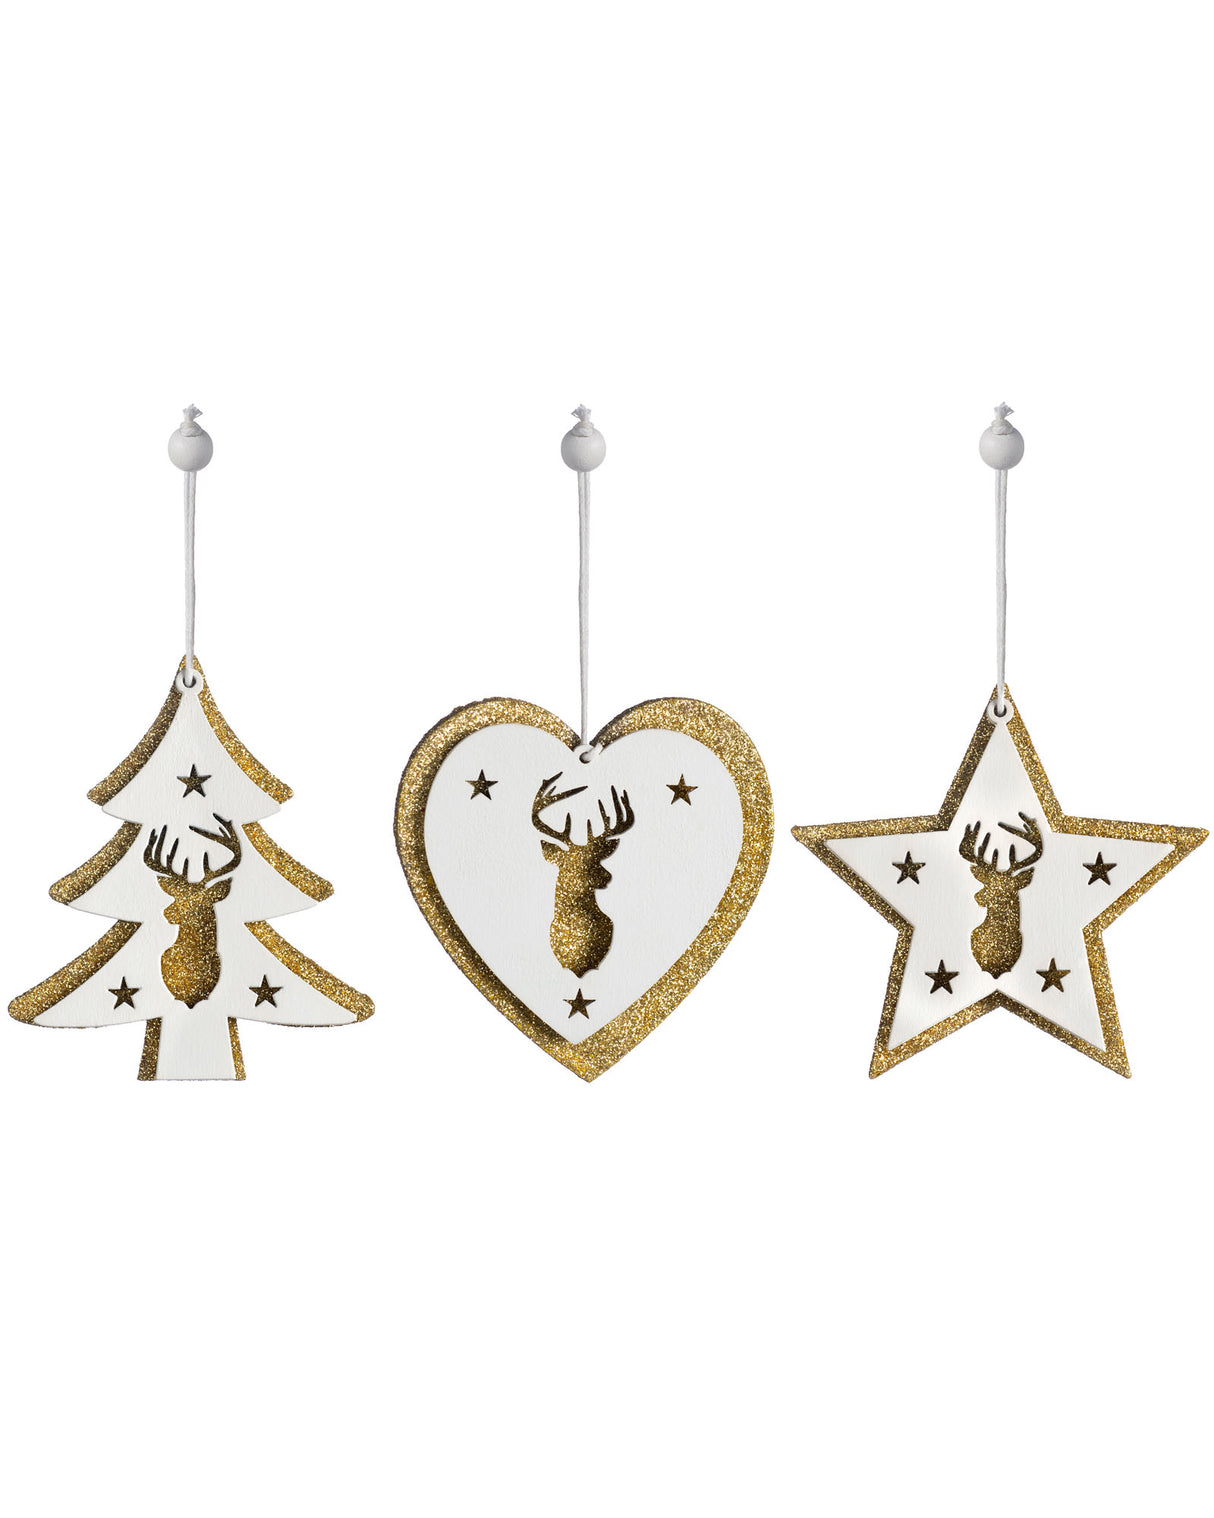 Set of 6 Hanging Christmas Decorations 9cm, Gold